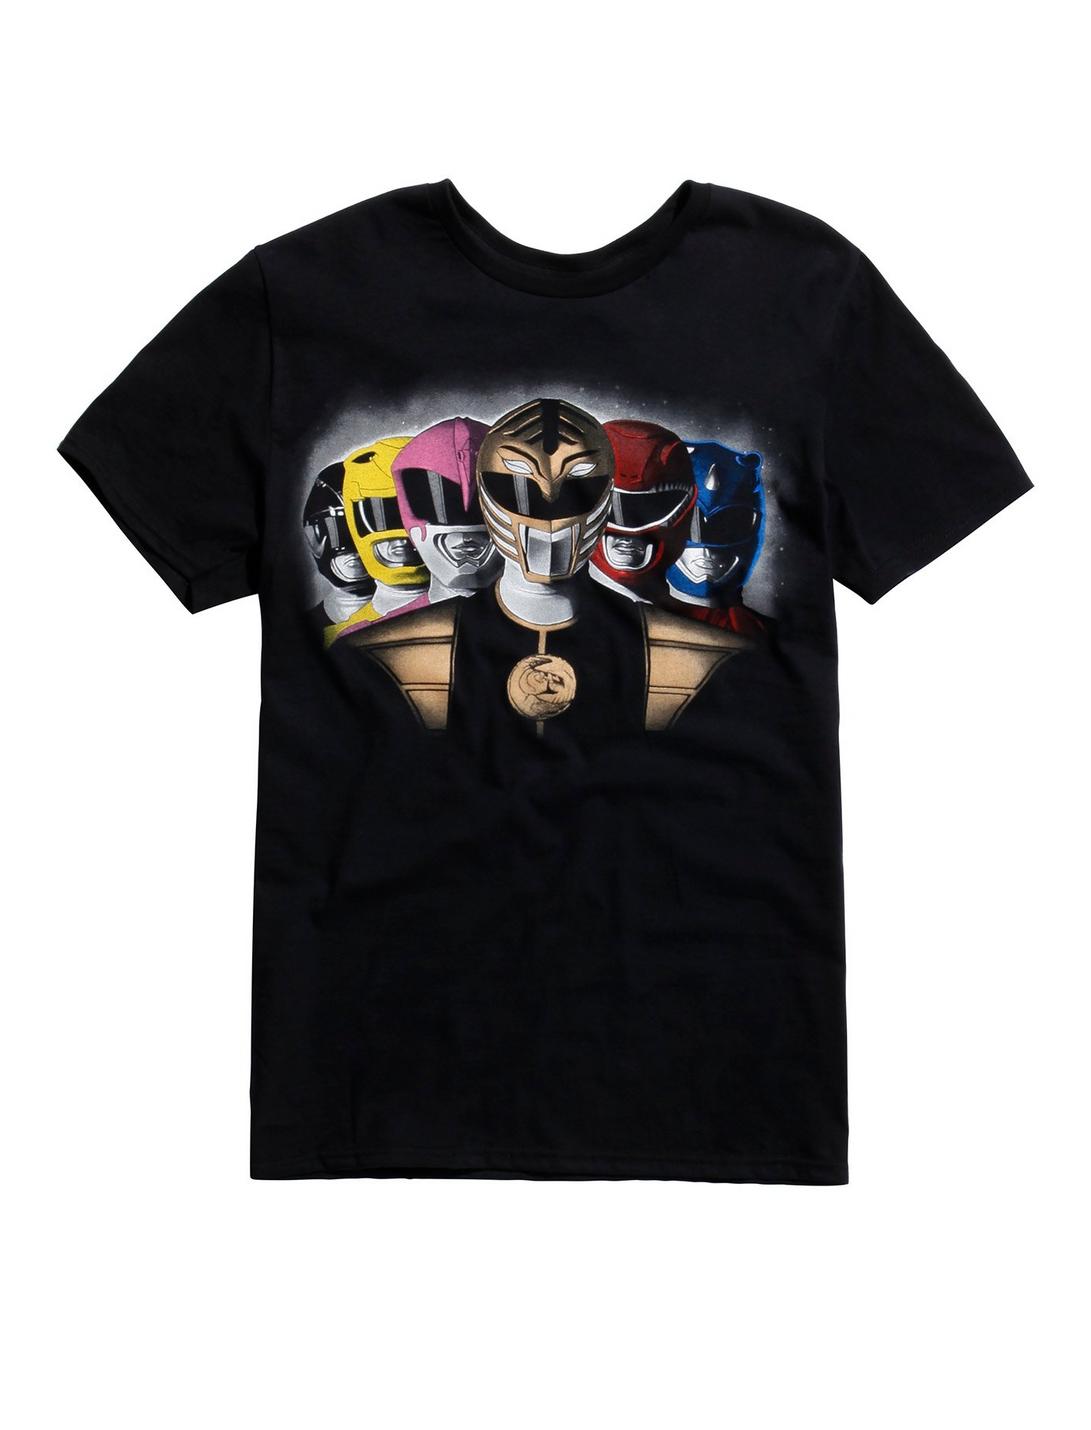 Mighty Morphin Power Rangers Group T-Shirt, BLACK, hi-res